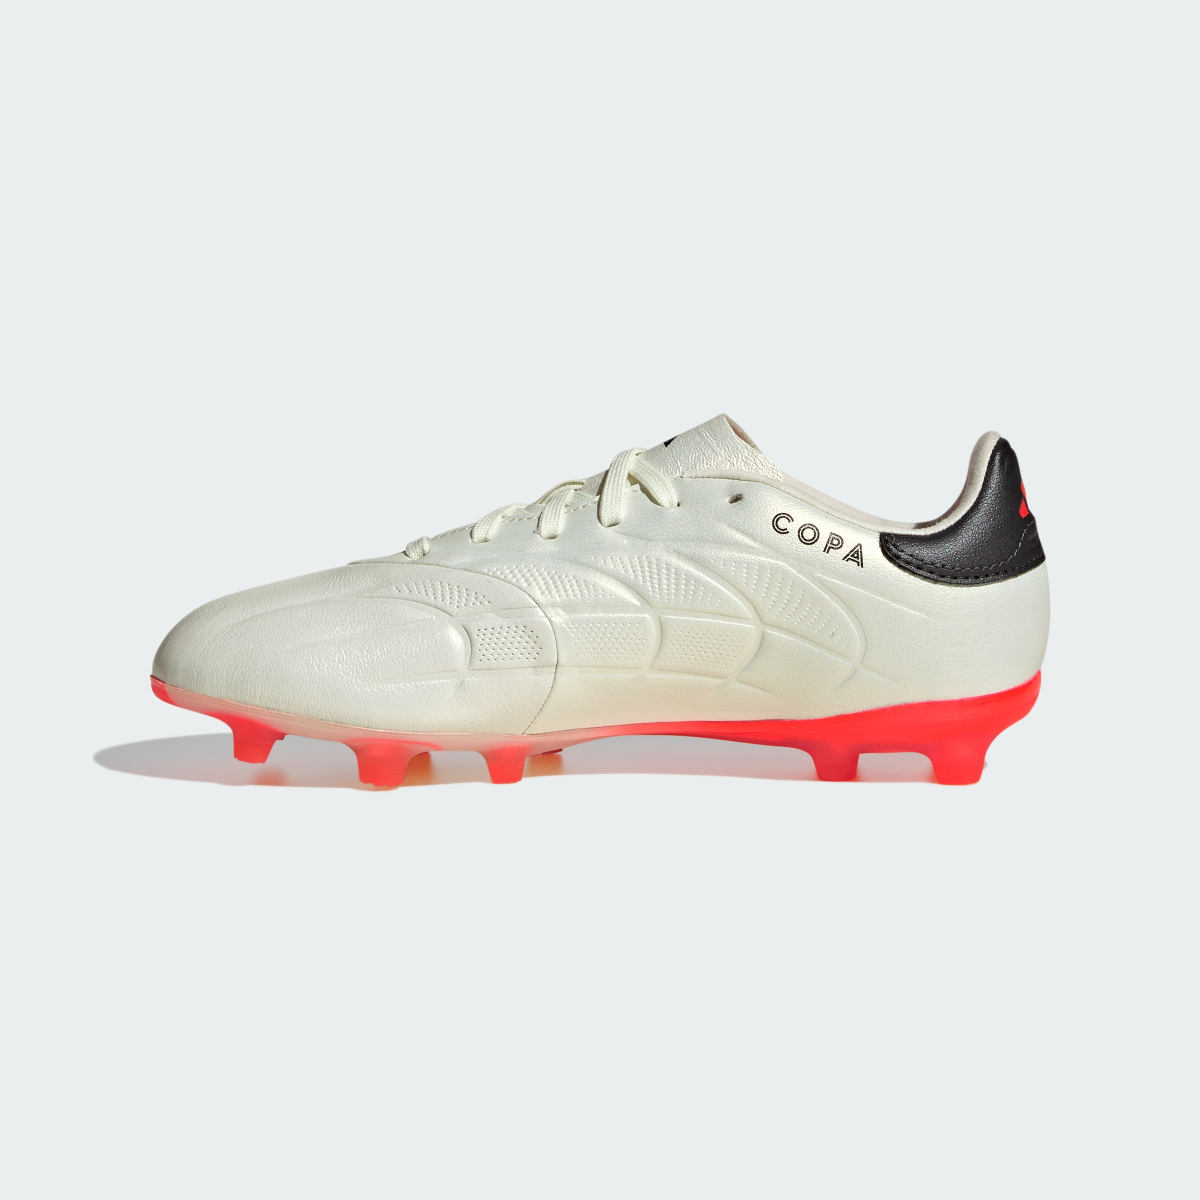 Adidas Copa Pure II Elite Firm Ground Cleats. 7